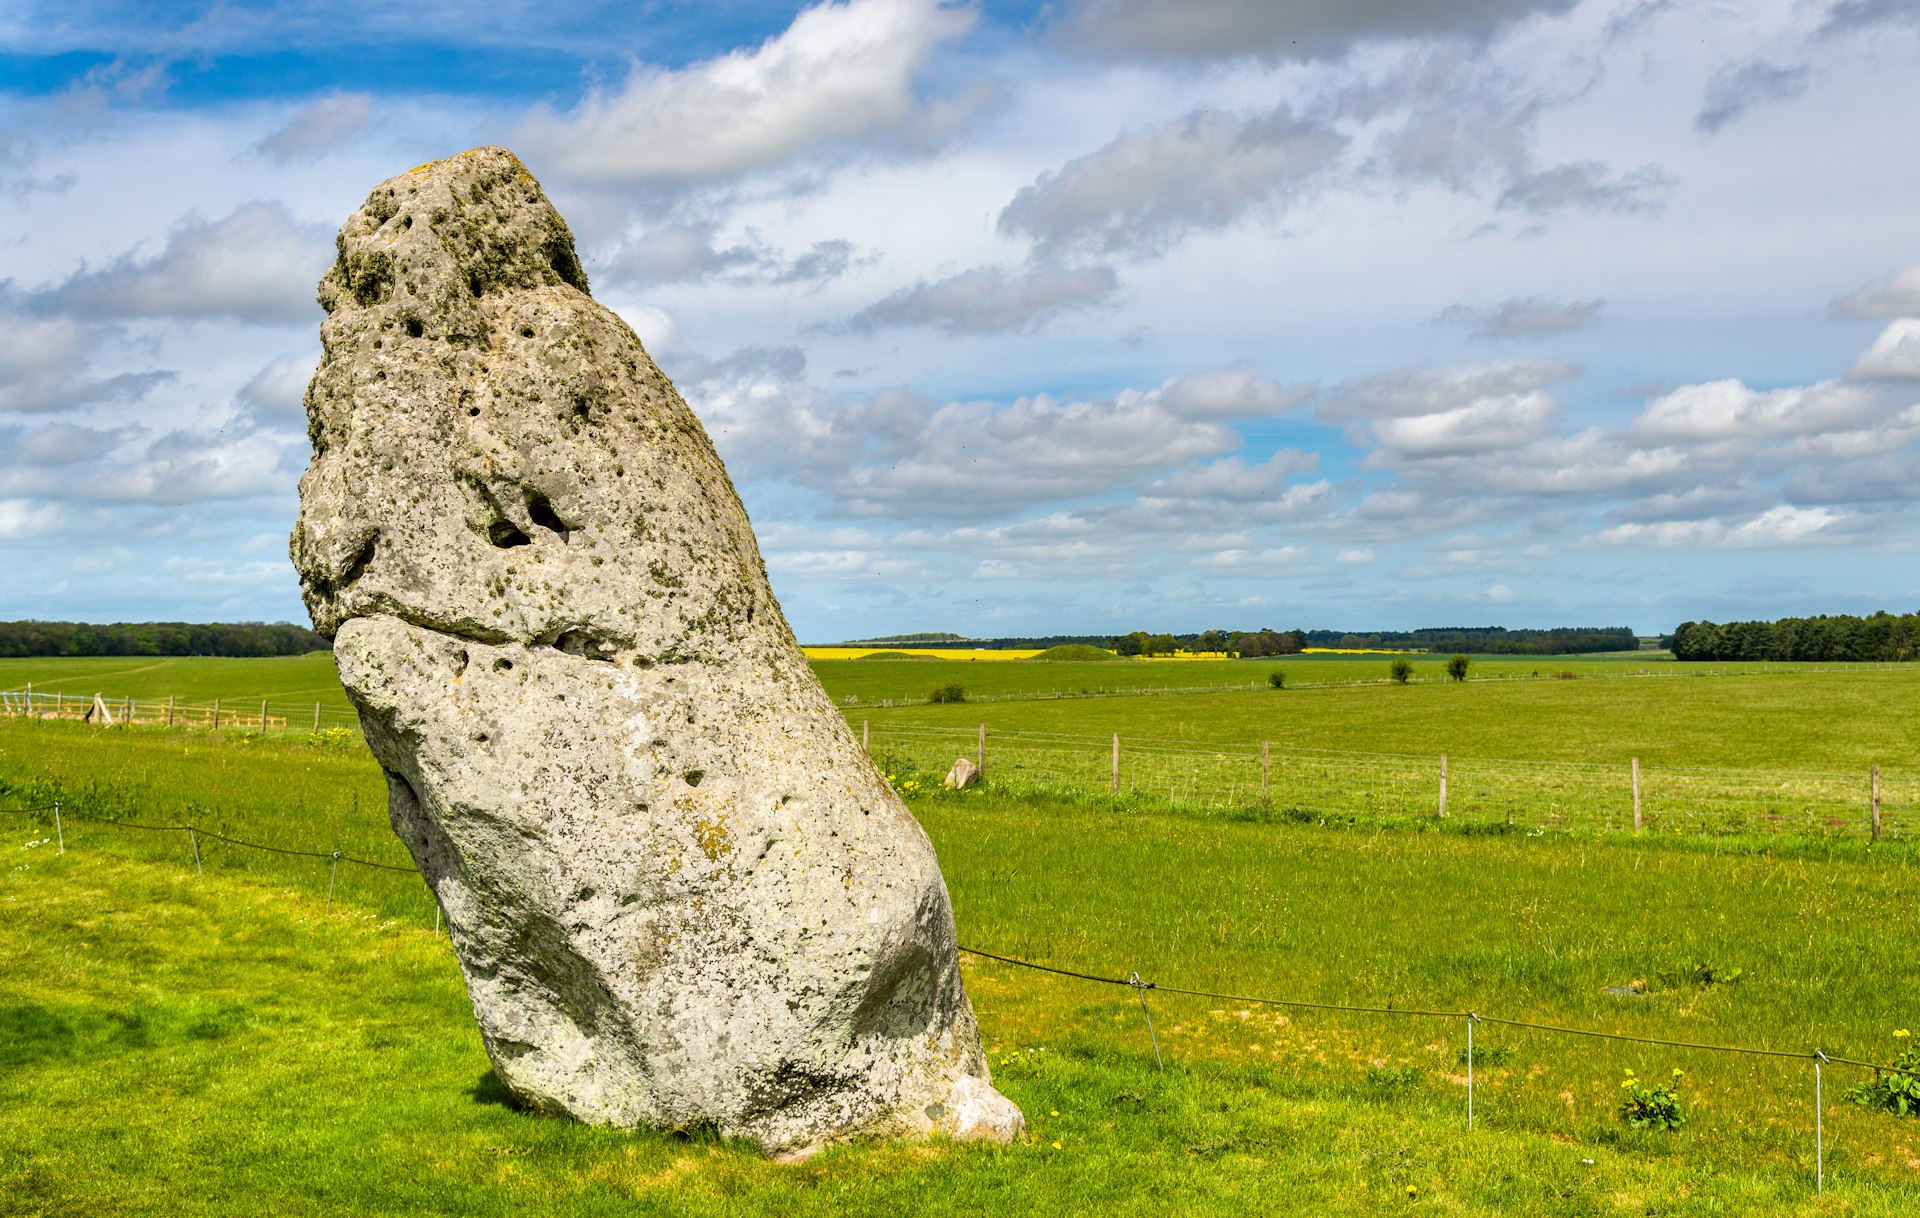 A giant stone stands alone, surrounded by green farmland. The stone leans slightly to the left